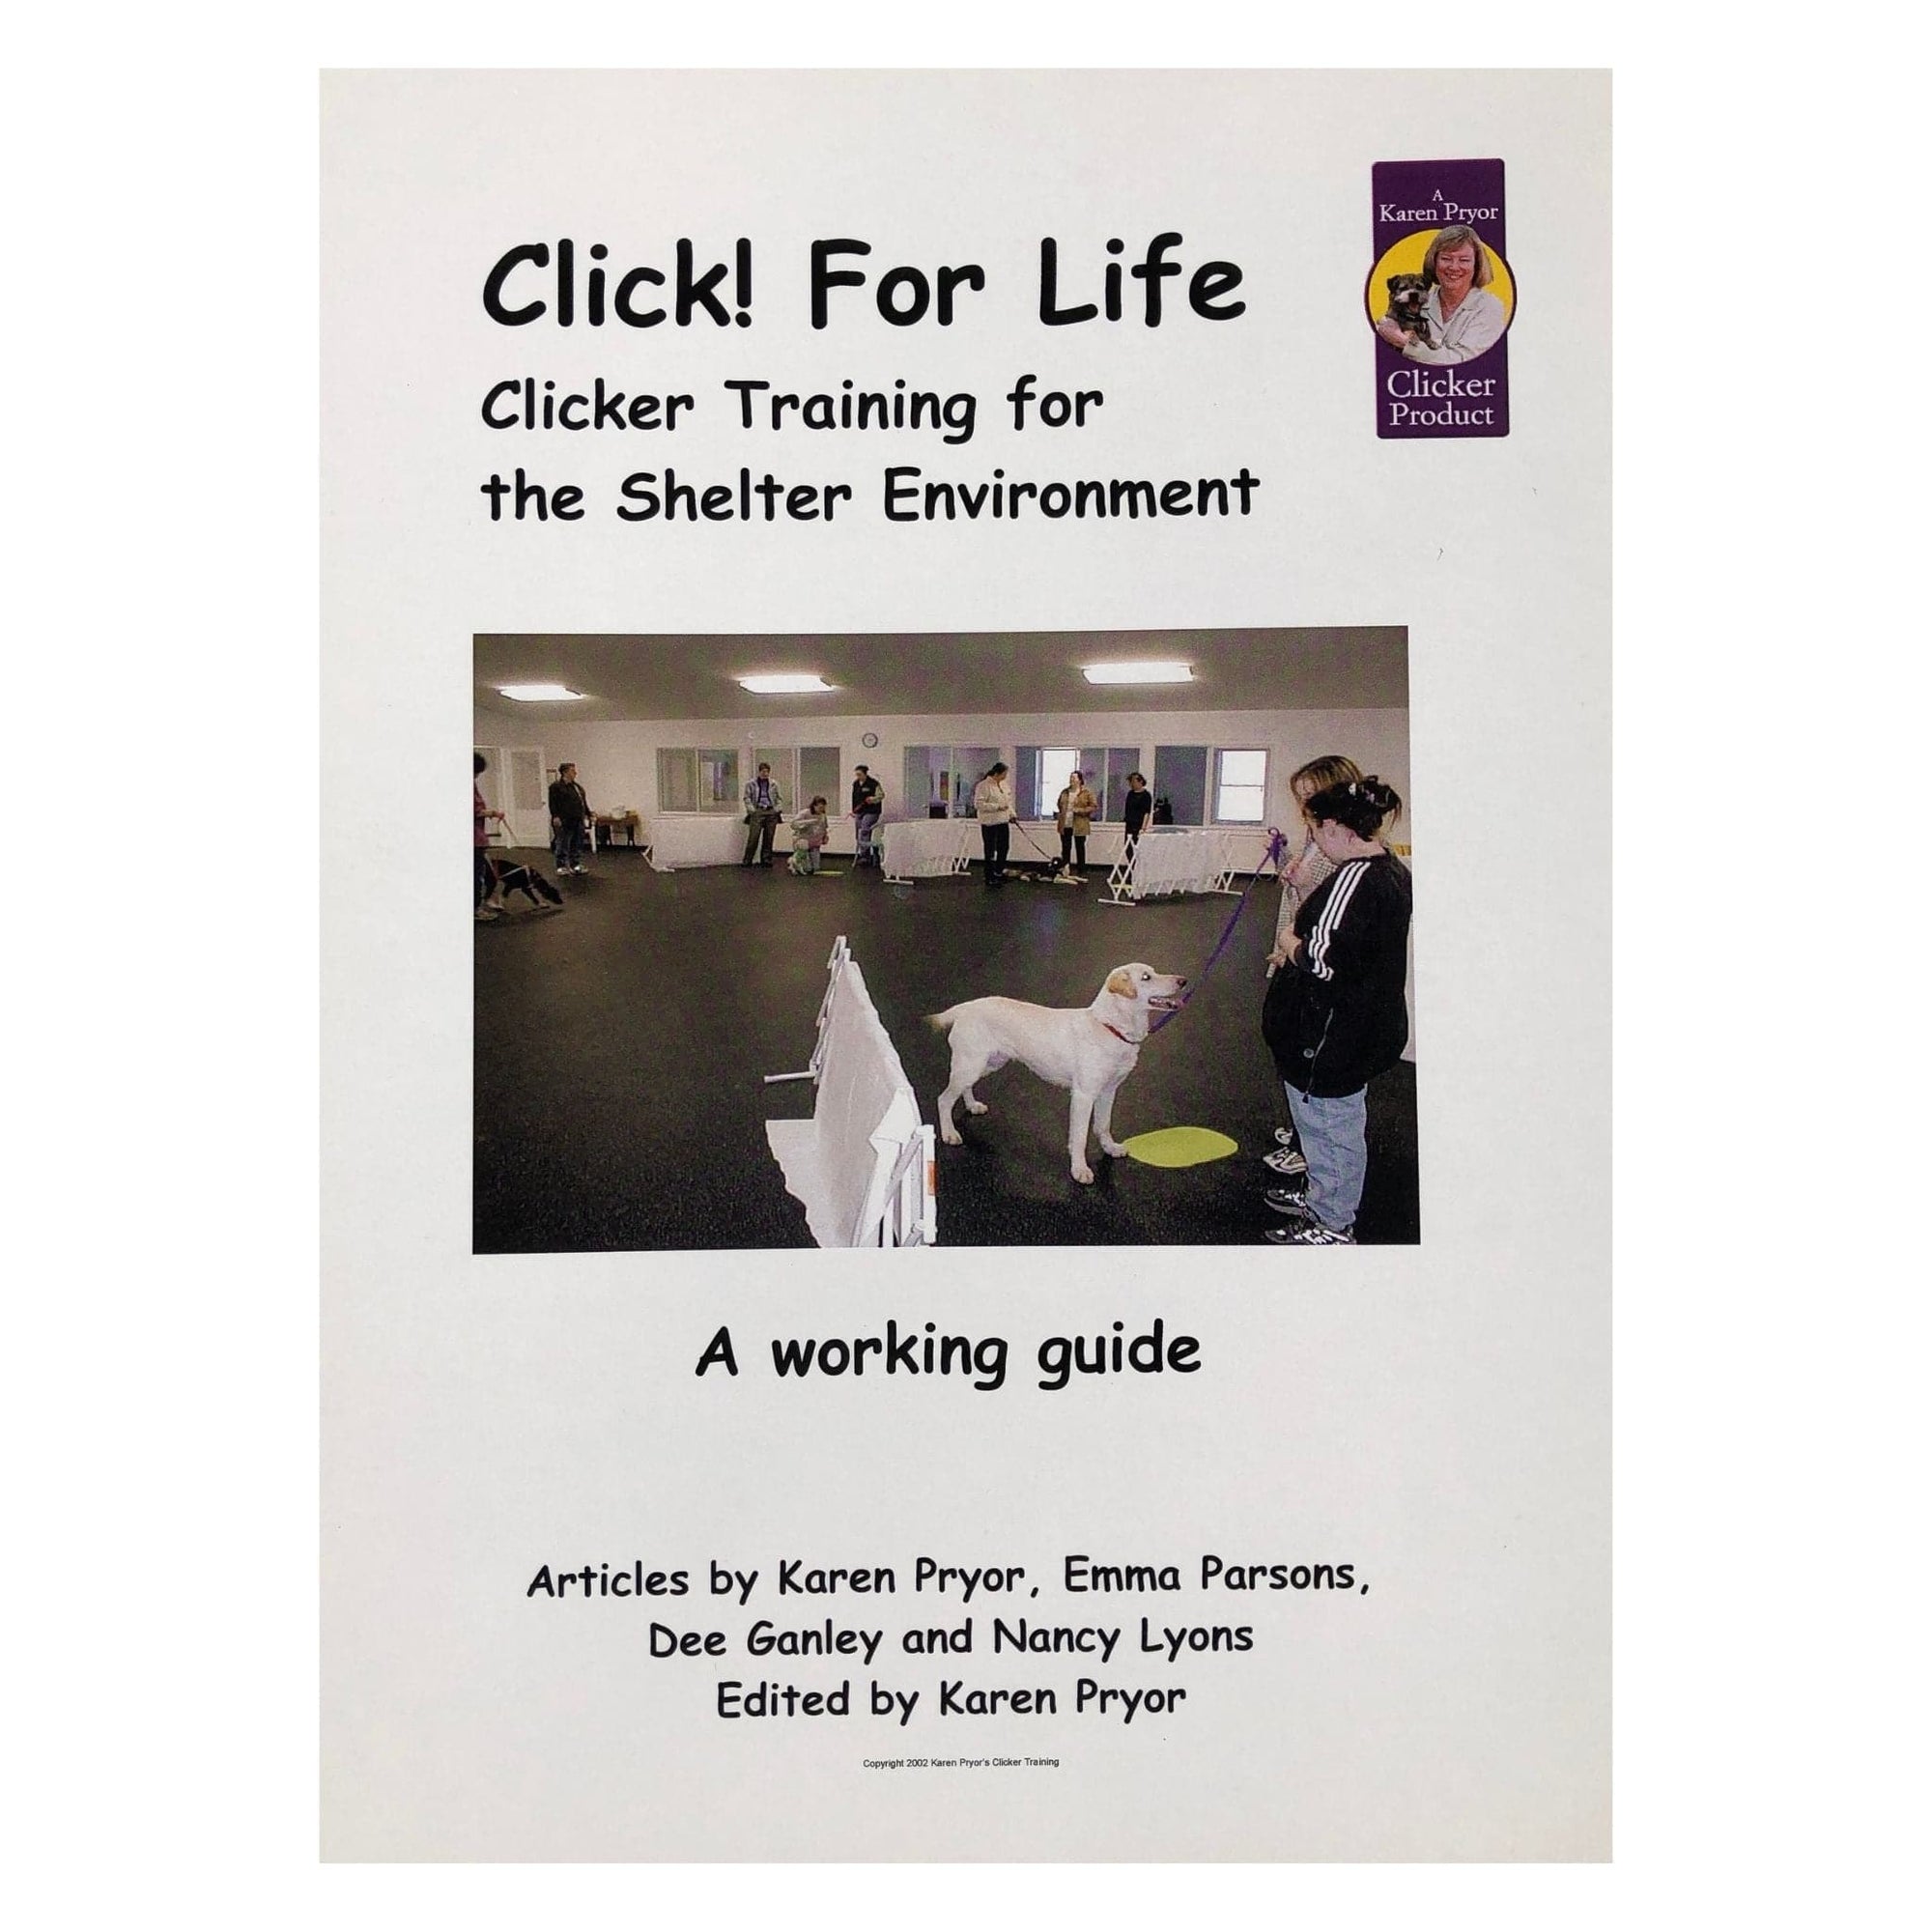 Click For Life! Clicker Training for the Shelter Environment